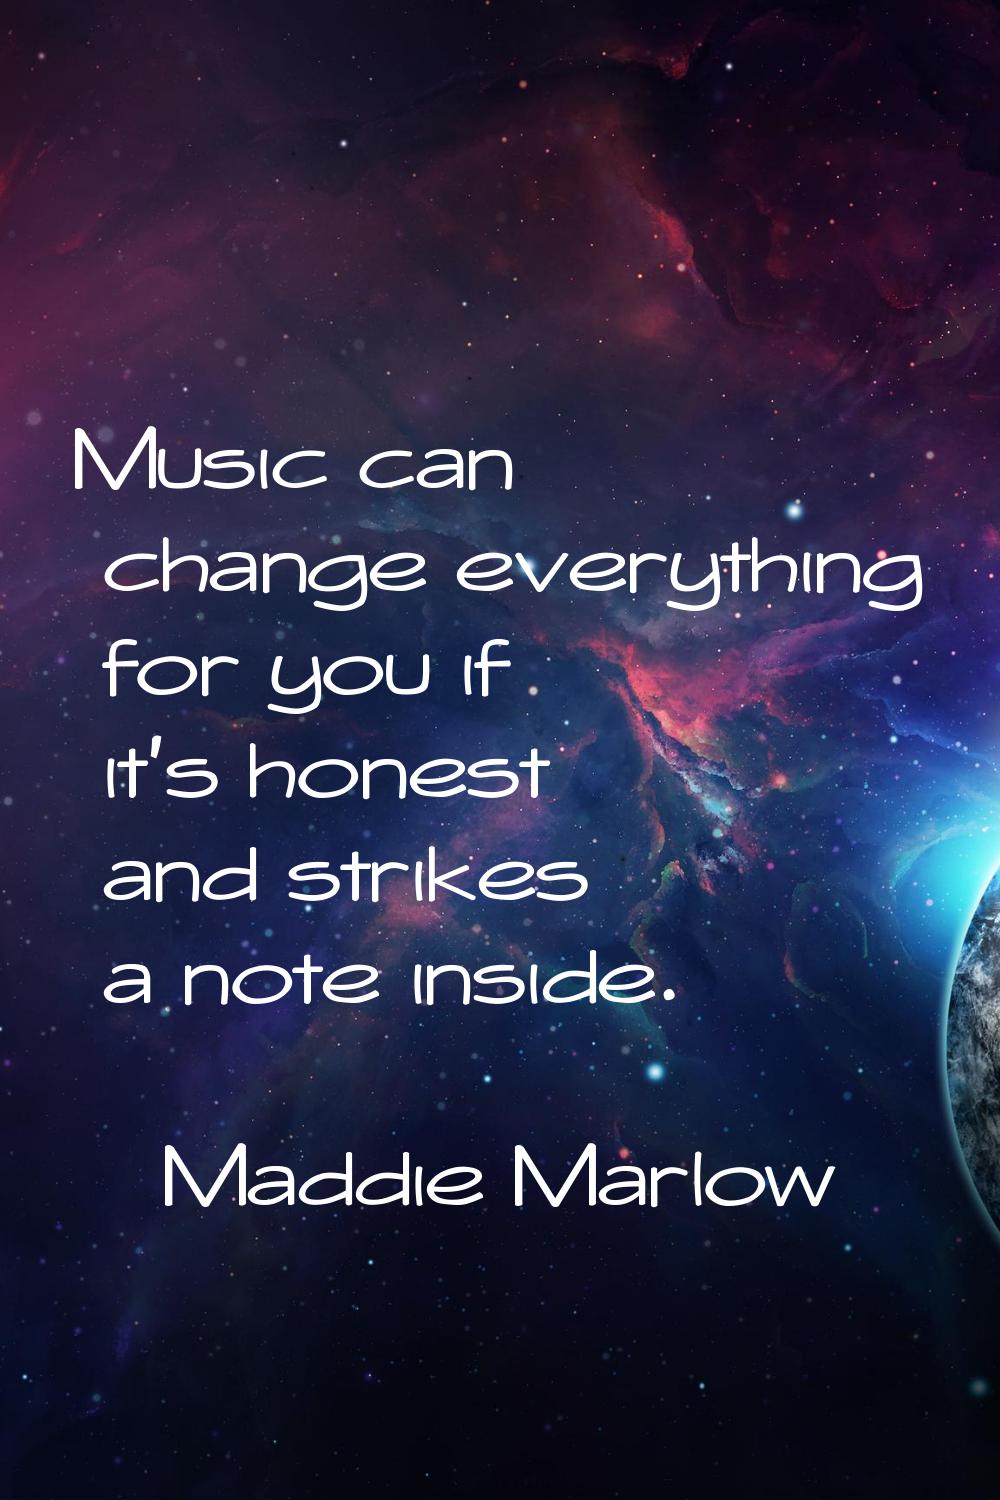 Music can change everything for you if it's honest and strikes a note inside.